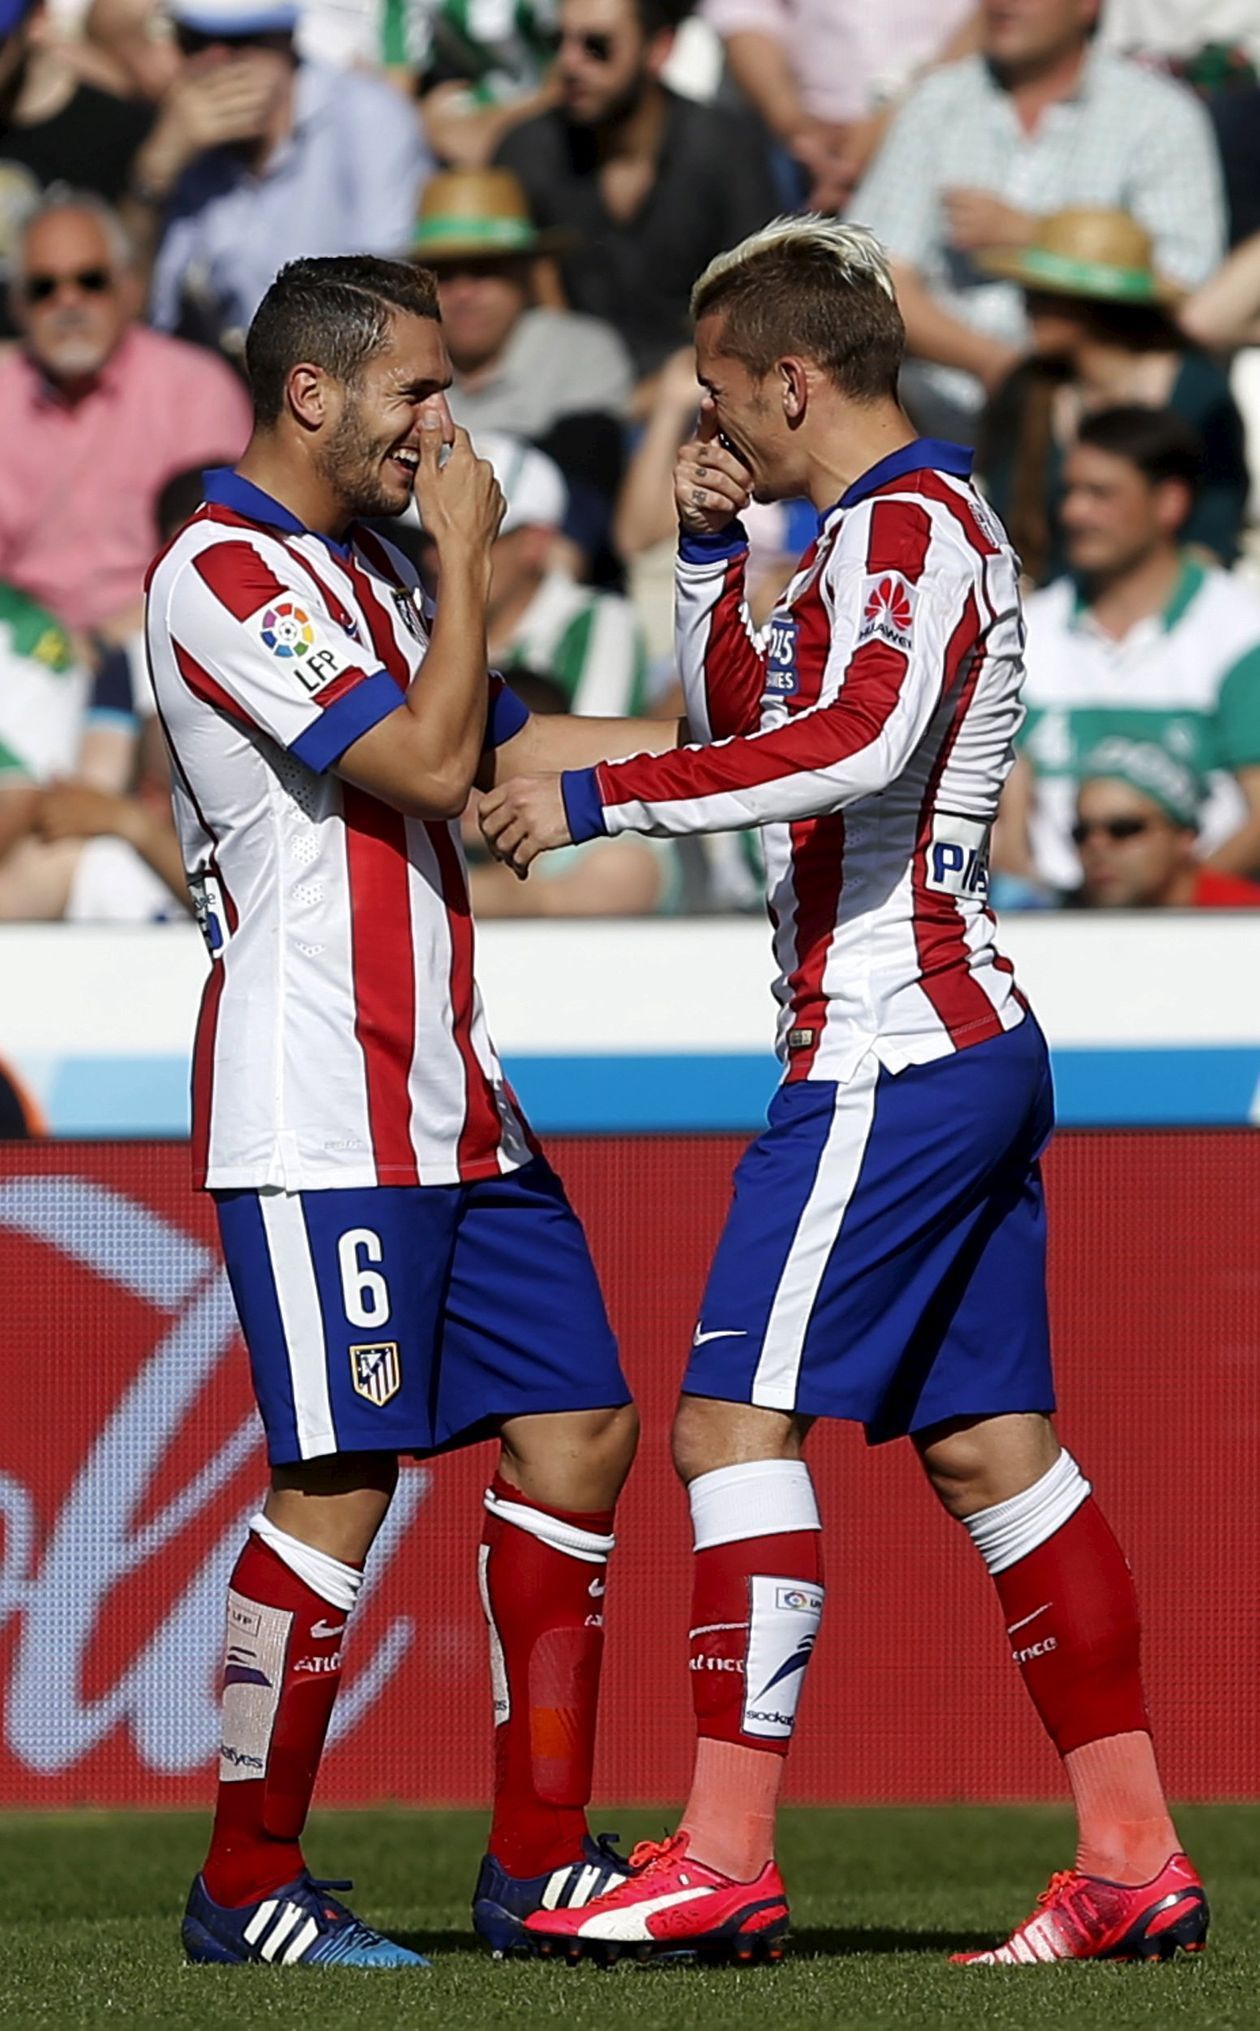 Atletico Madrid's Antoine Griezmann and team mate Koke celebrate after scoring a goal against Cordoba during their Spanish First Division soccer match at El Arcangel stadium in Cordoba